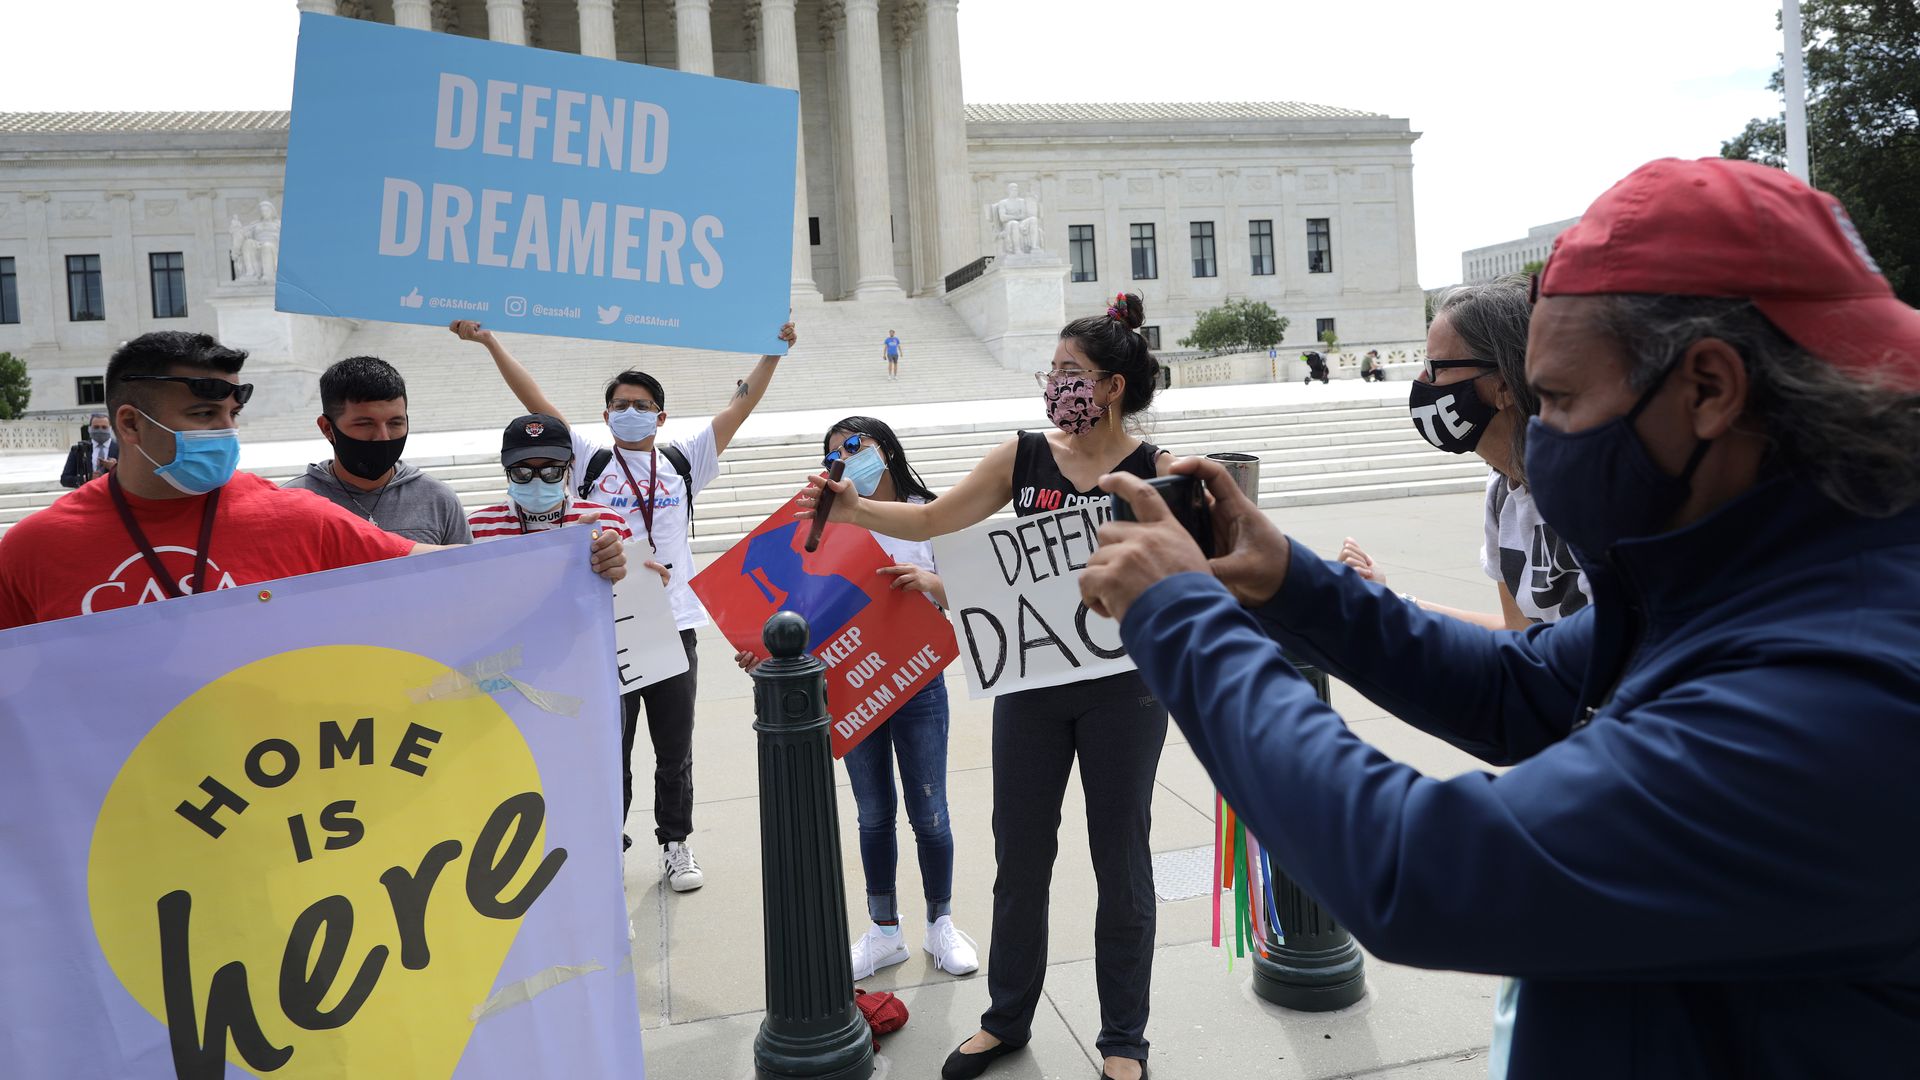 Advocates for immigrants with Deferred Action for Childhood Arrivals, or DACA, rally in front of the U.S. Supreme Court 